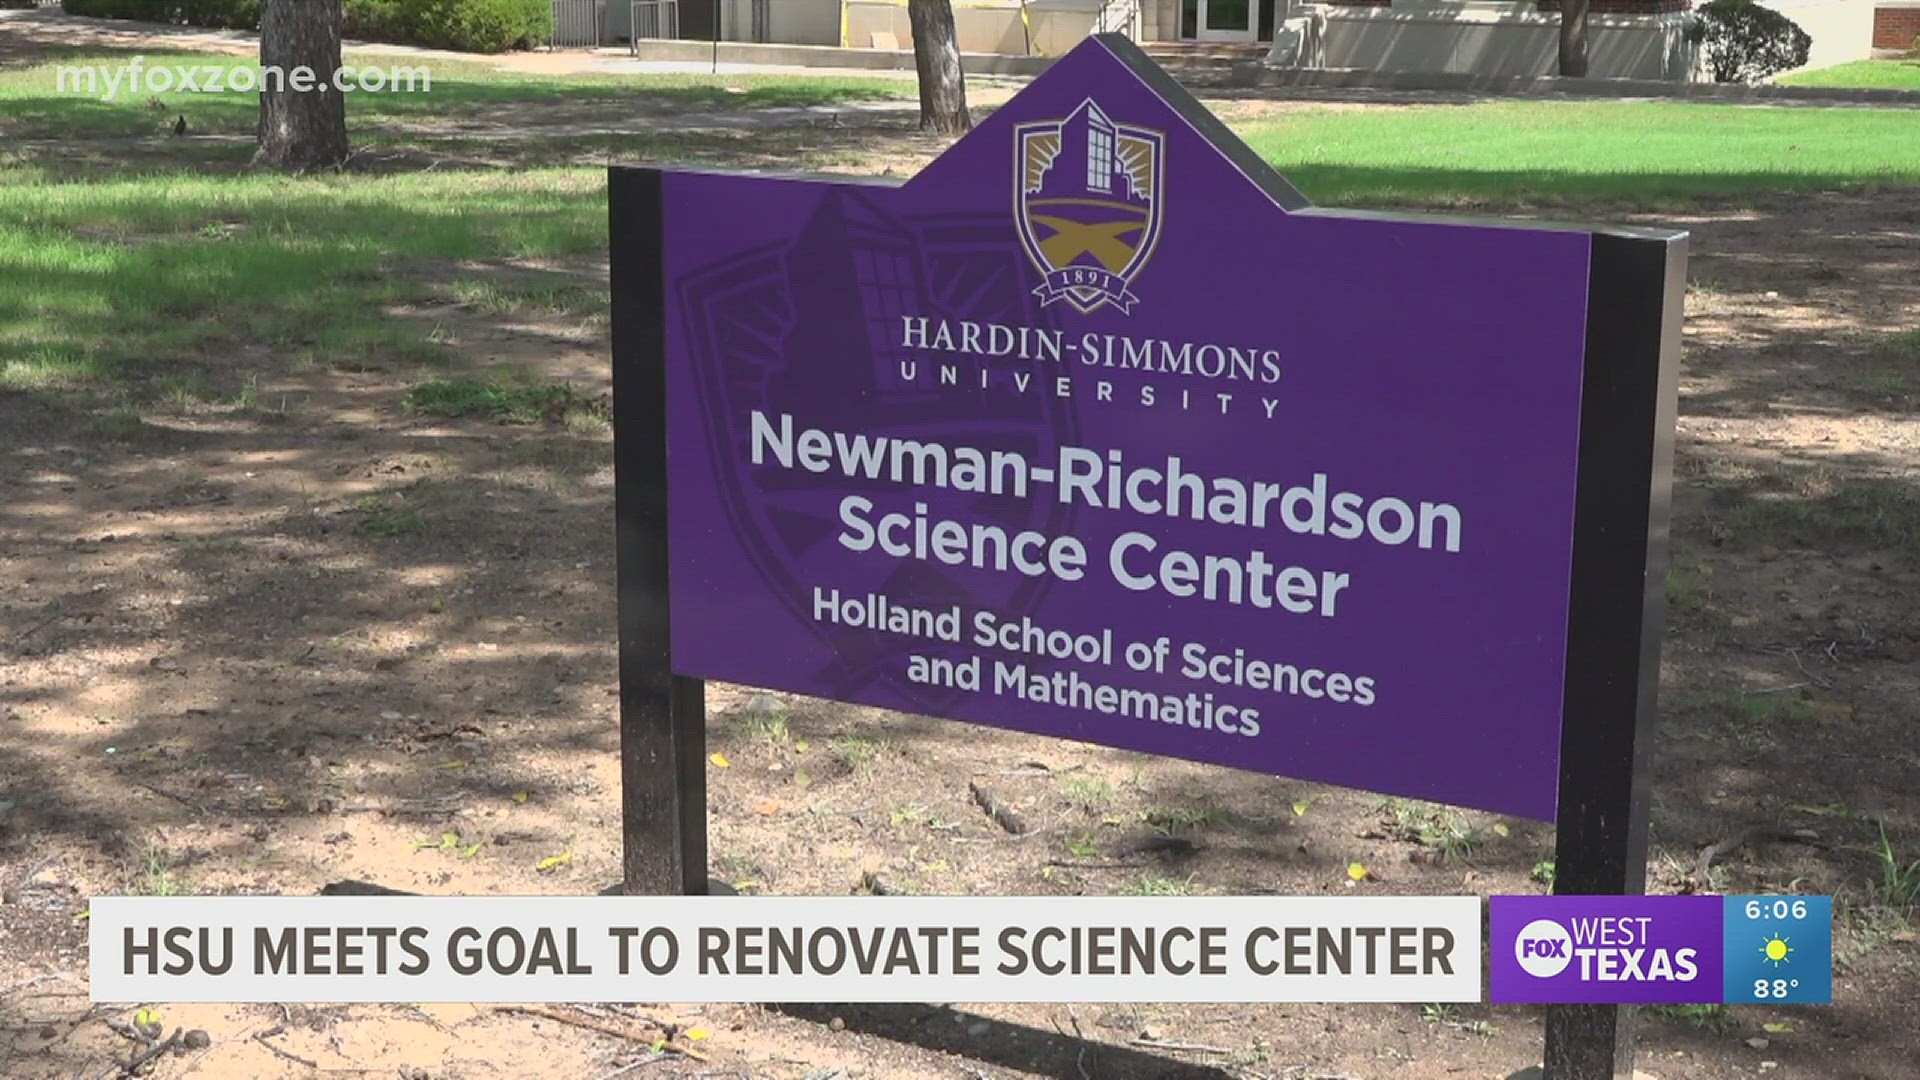 HSU has met its goal to renovate the Newman-Richardson Science Center.